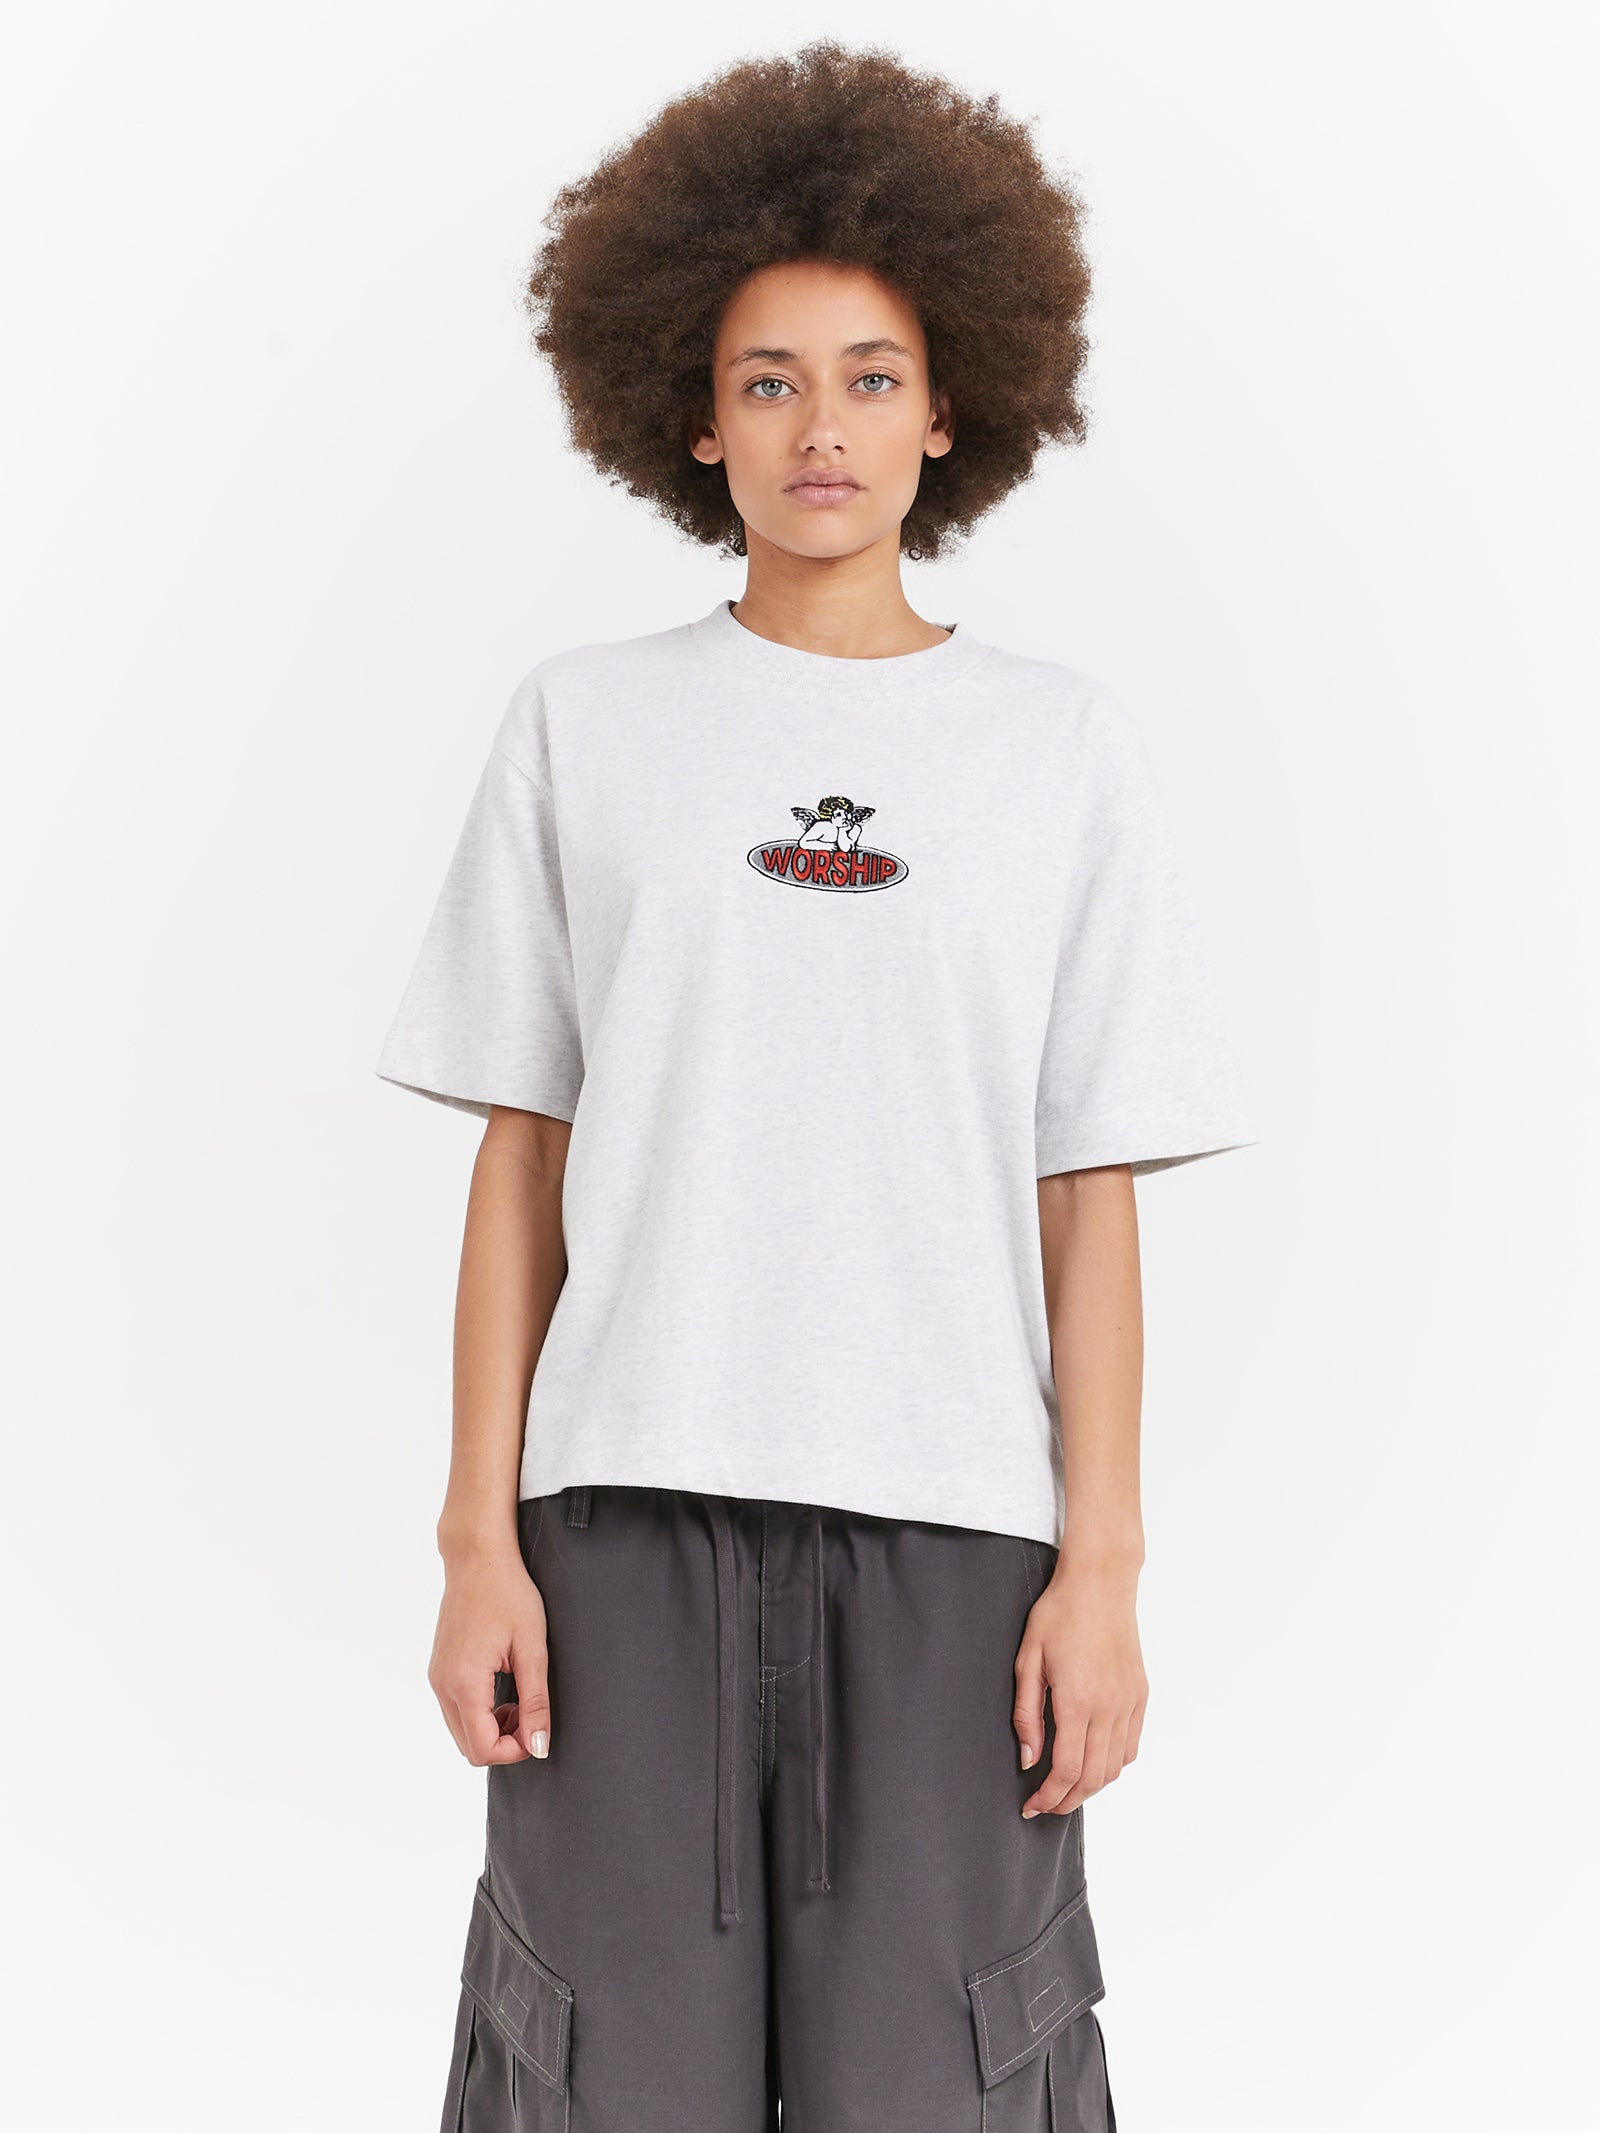 Check In Regular Fit T-Shirt in Snow Marle